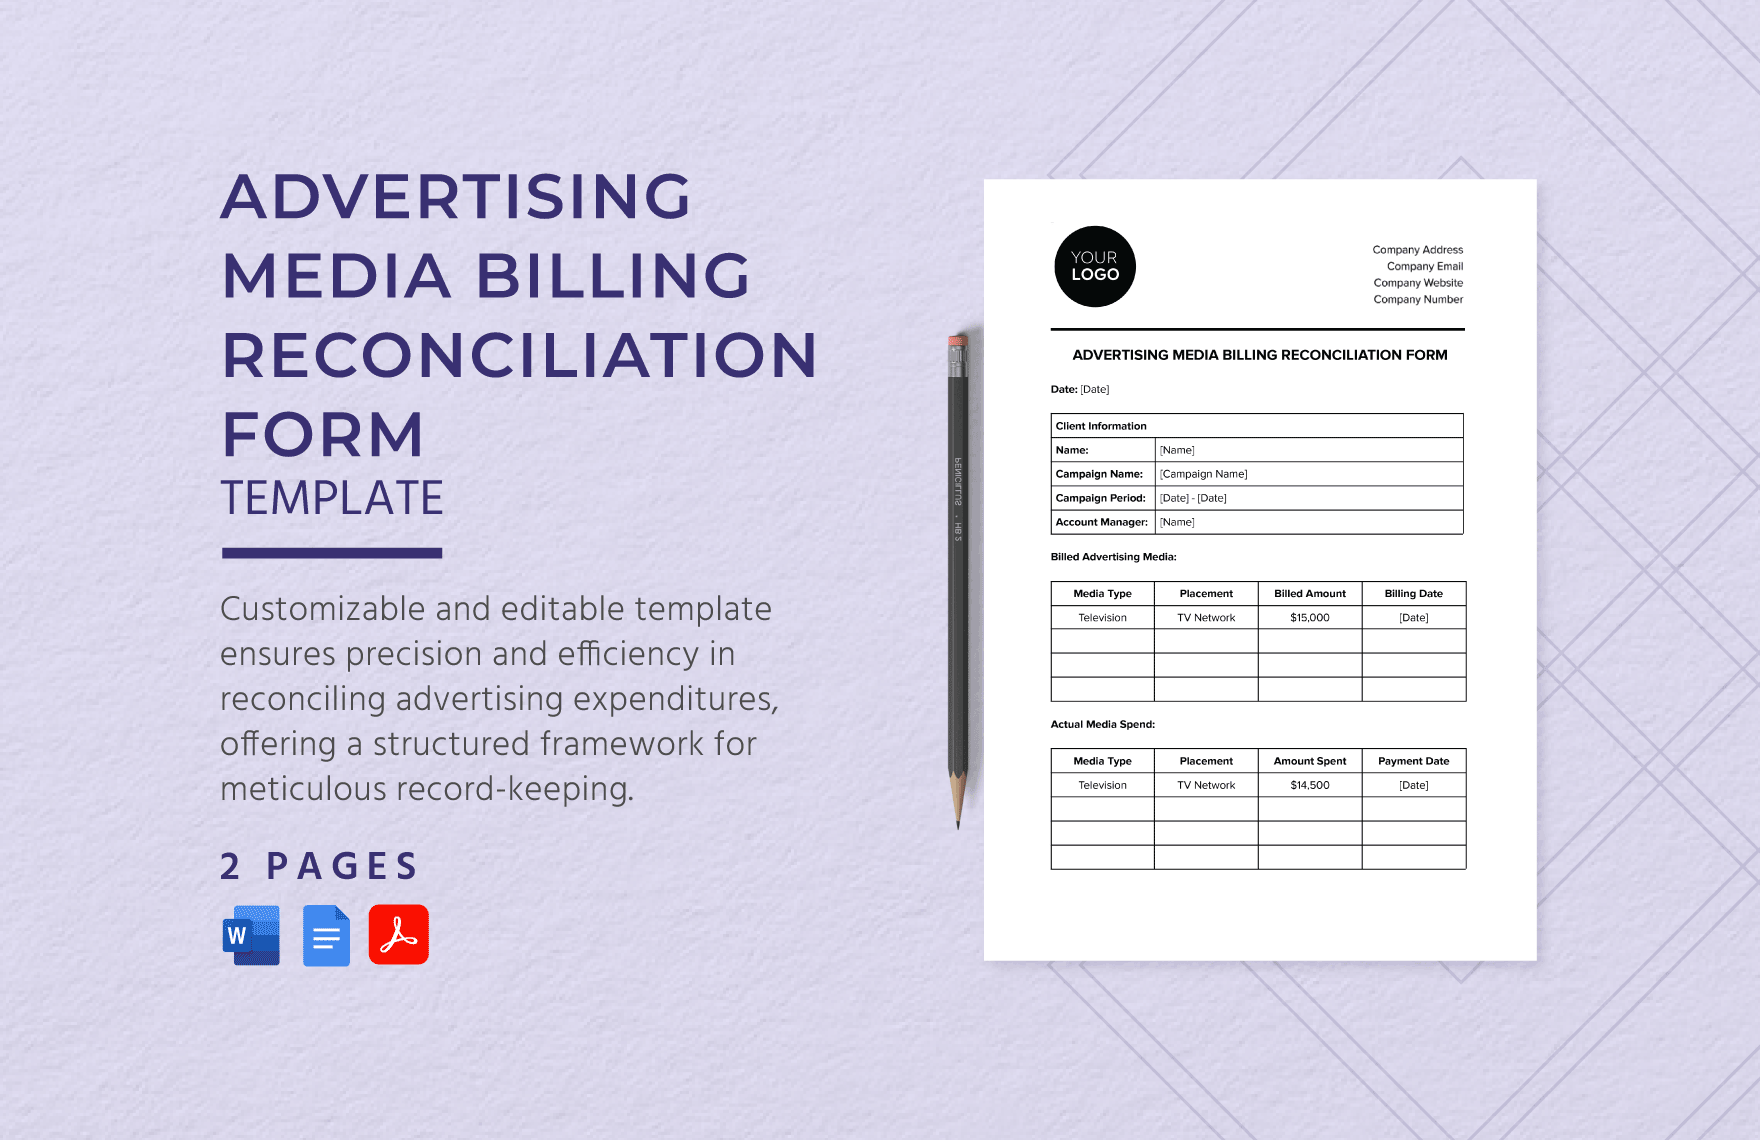 Advertising Media Billing Reconciliation Form Template in Word, Google Docs, PDF